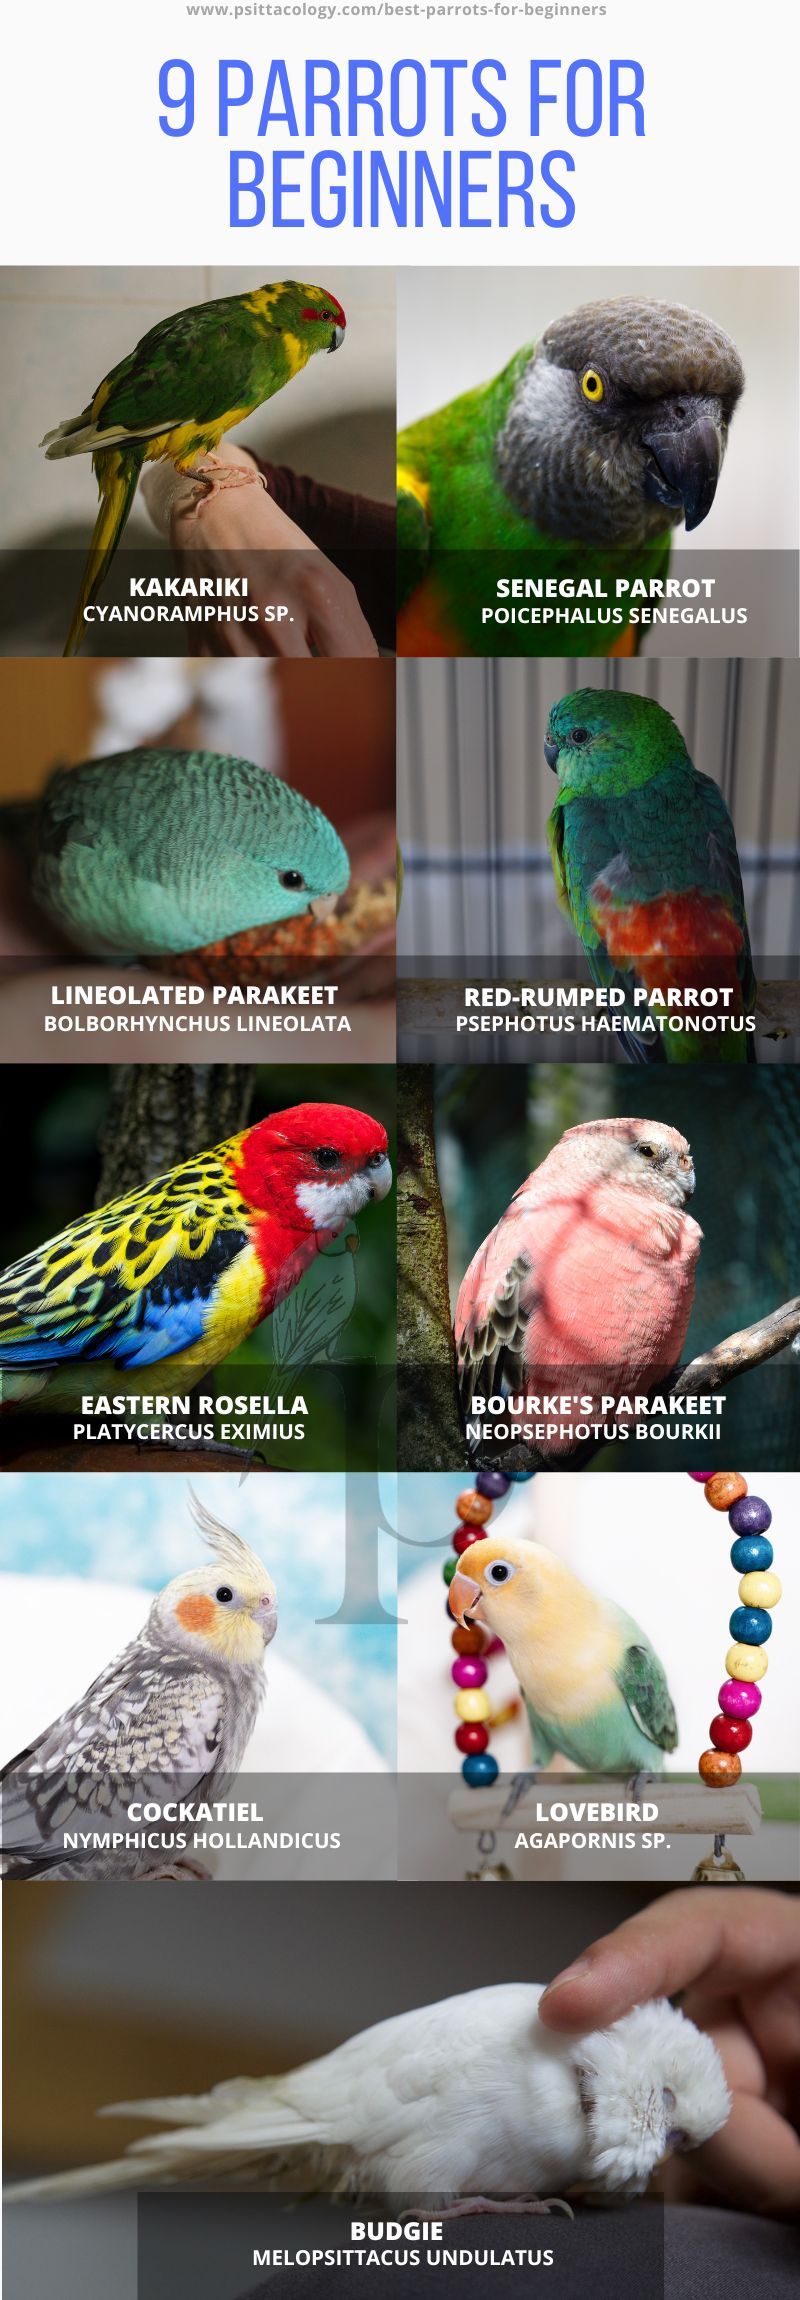 Infographic showing 9 parrot species for beginners